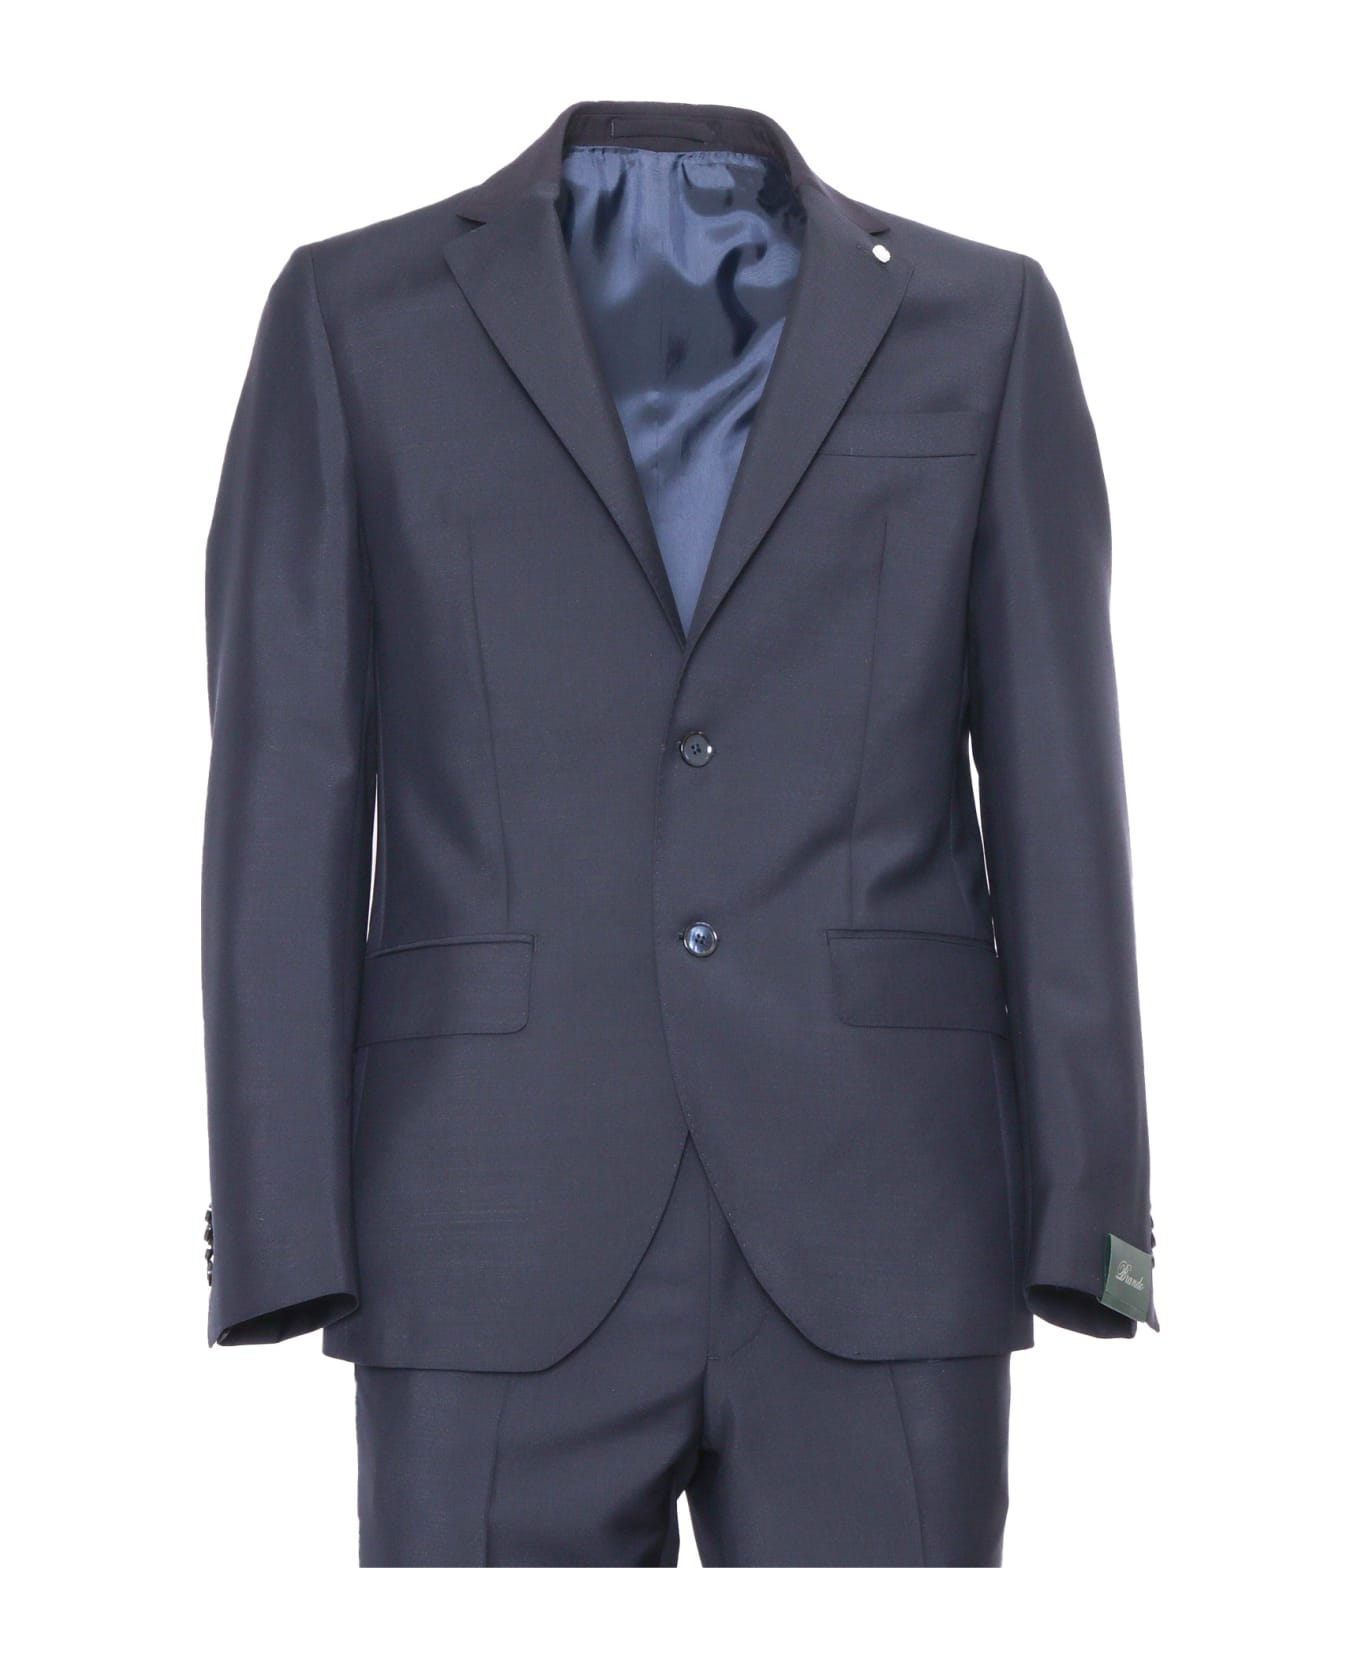 L.B.M. 1911 Single-breasted Suit - BLUE